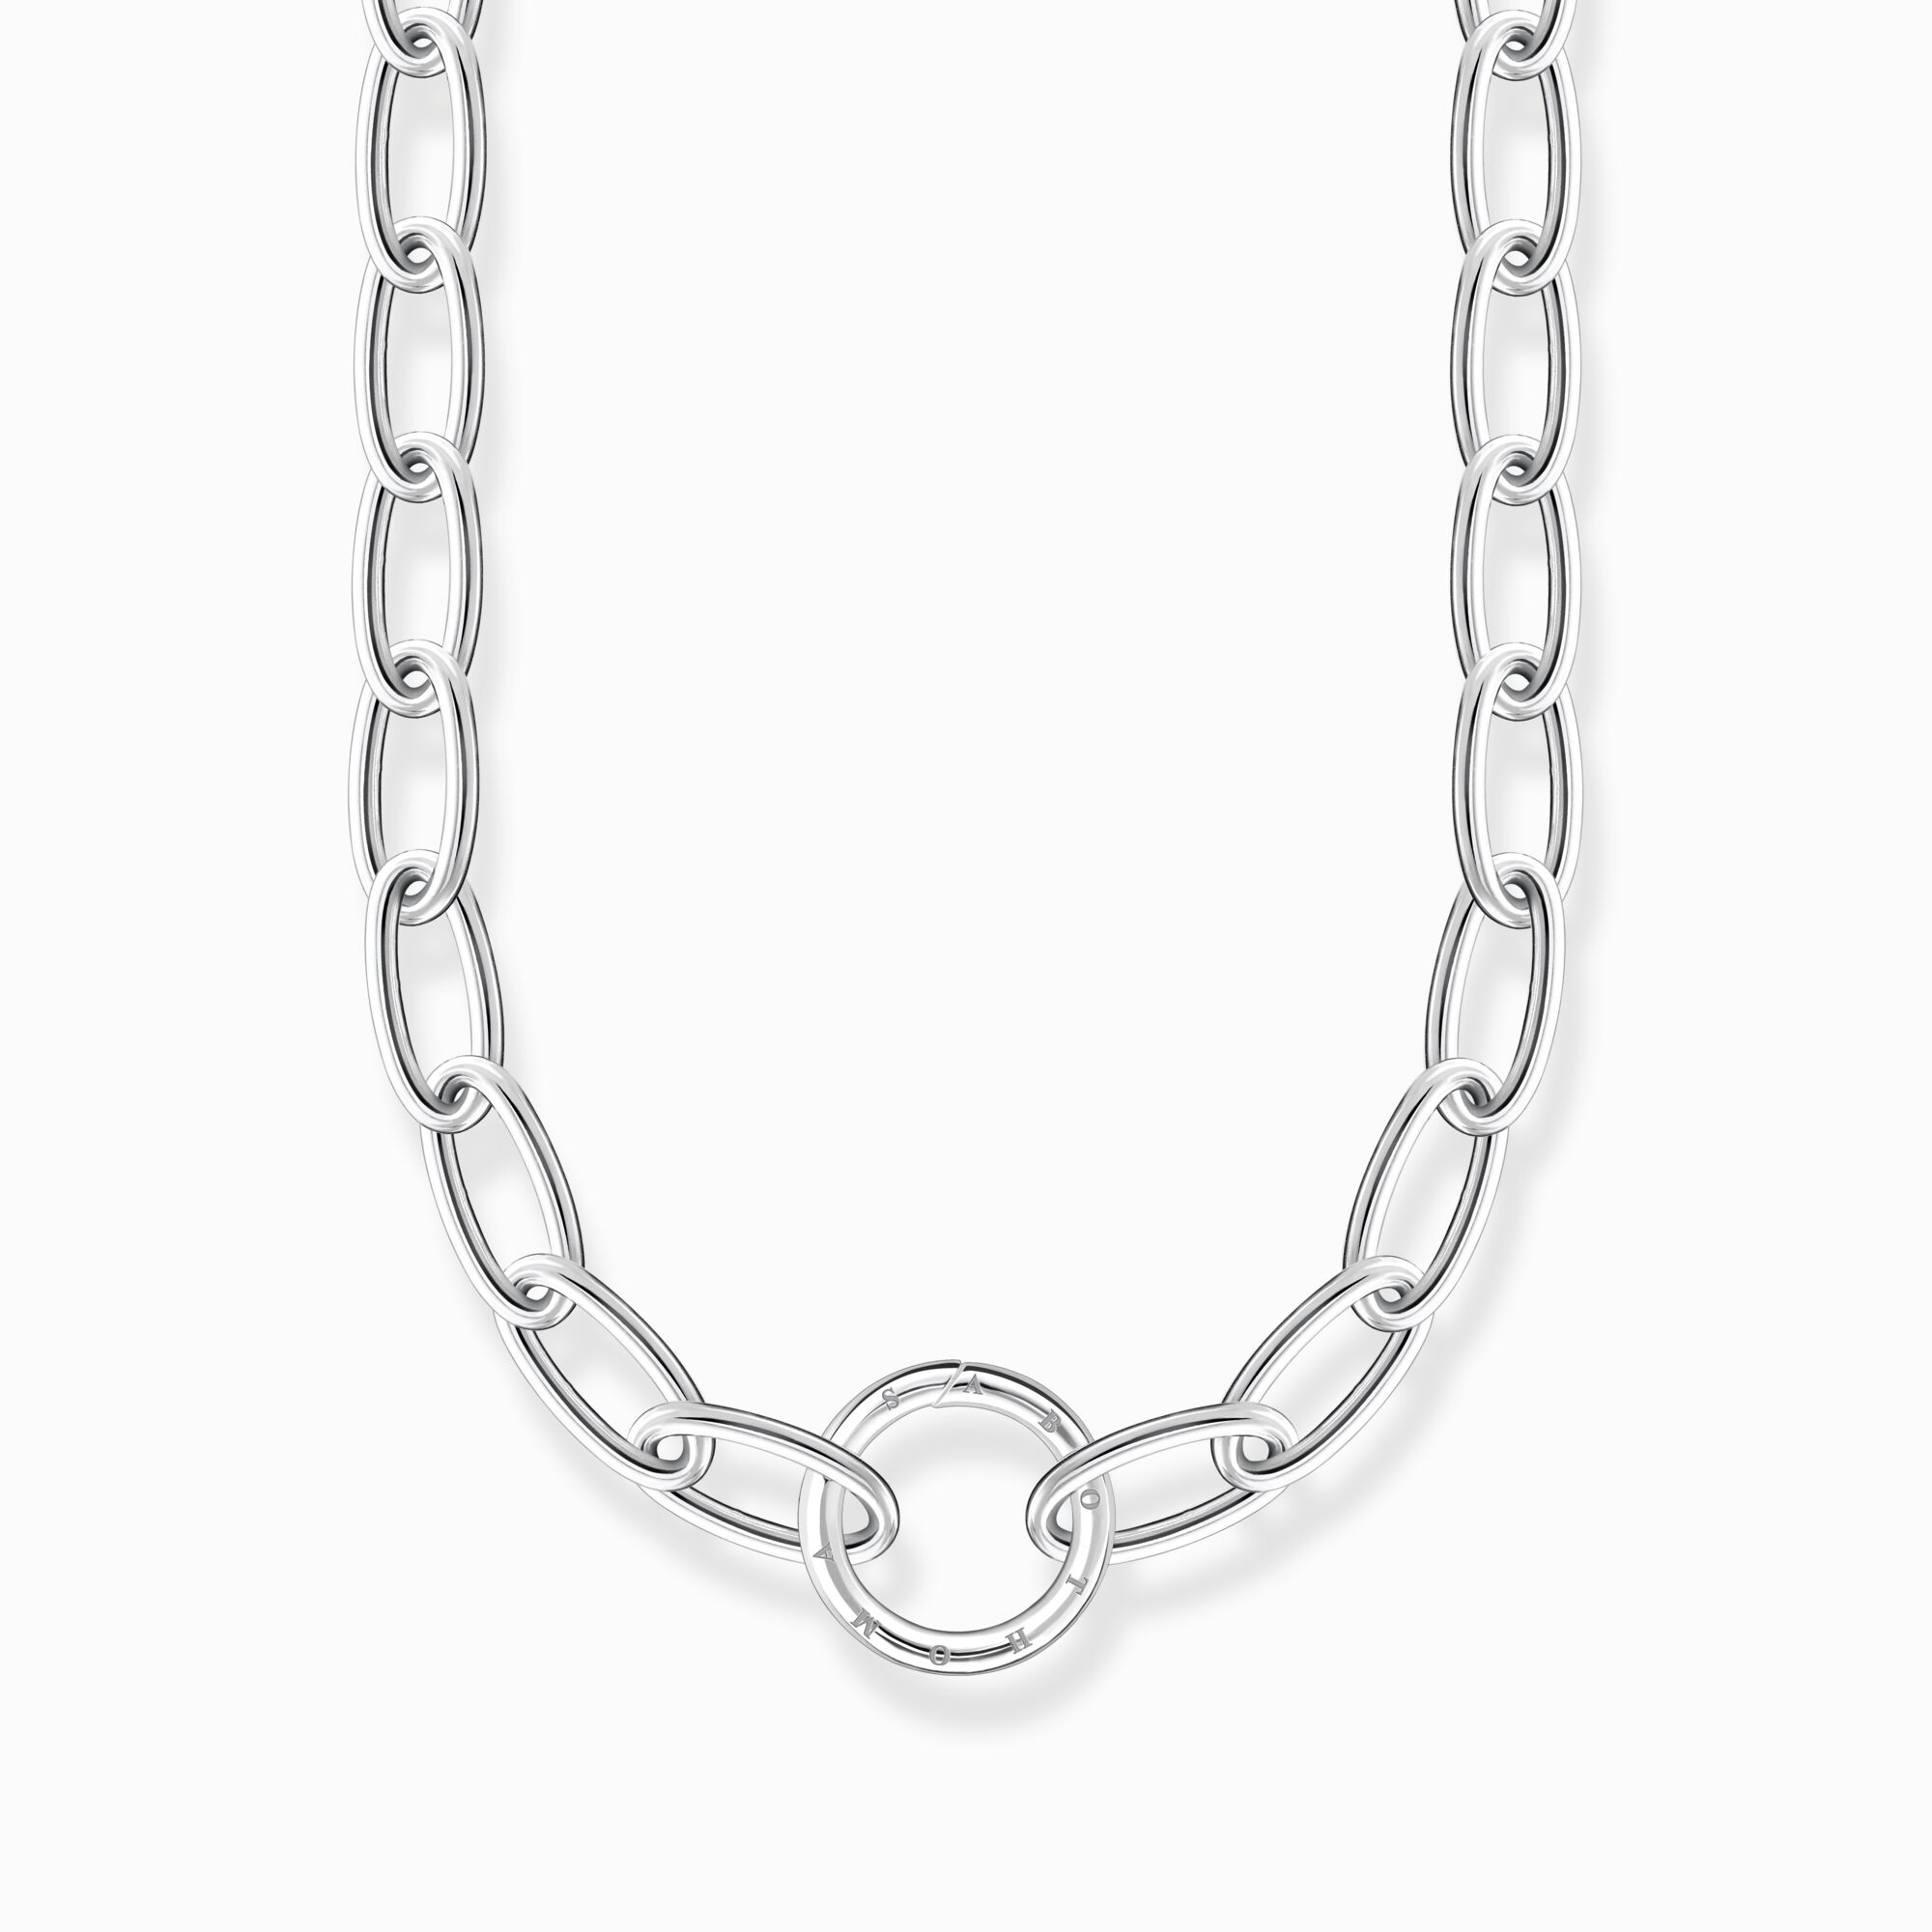 Chain necklace for women with THOMAS clasp ring – SABO